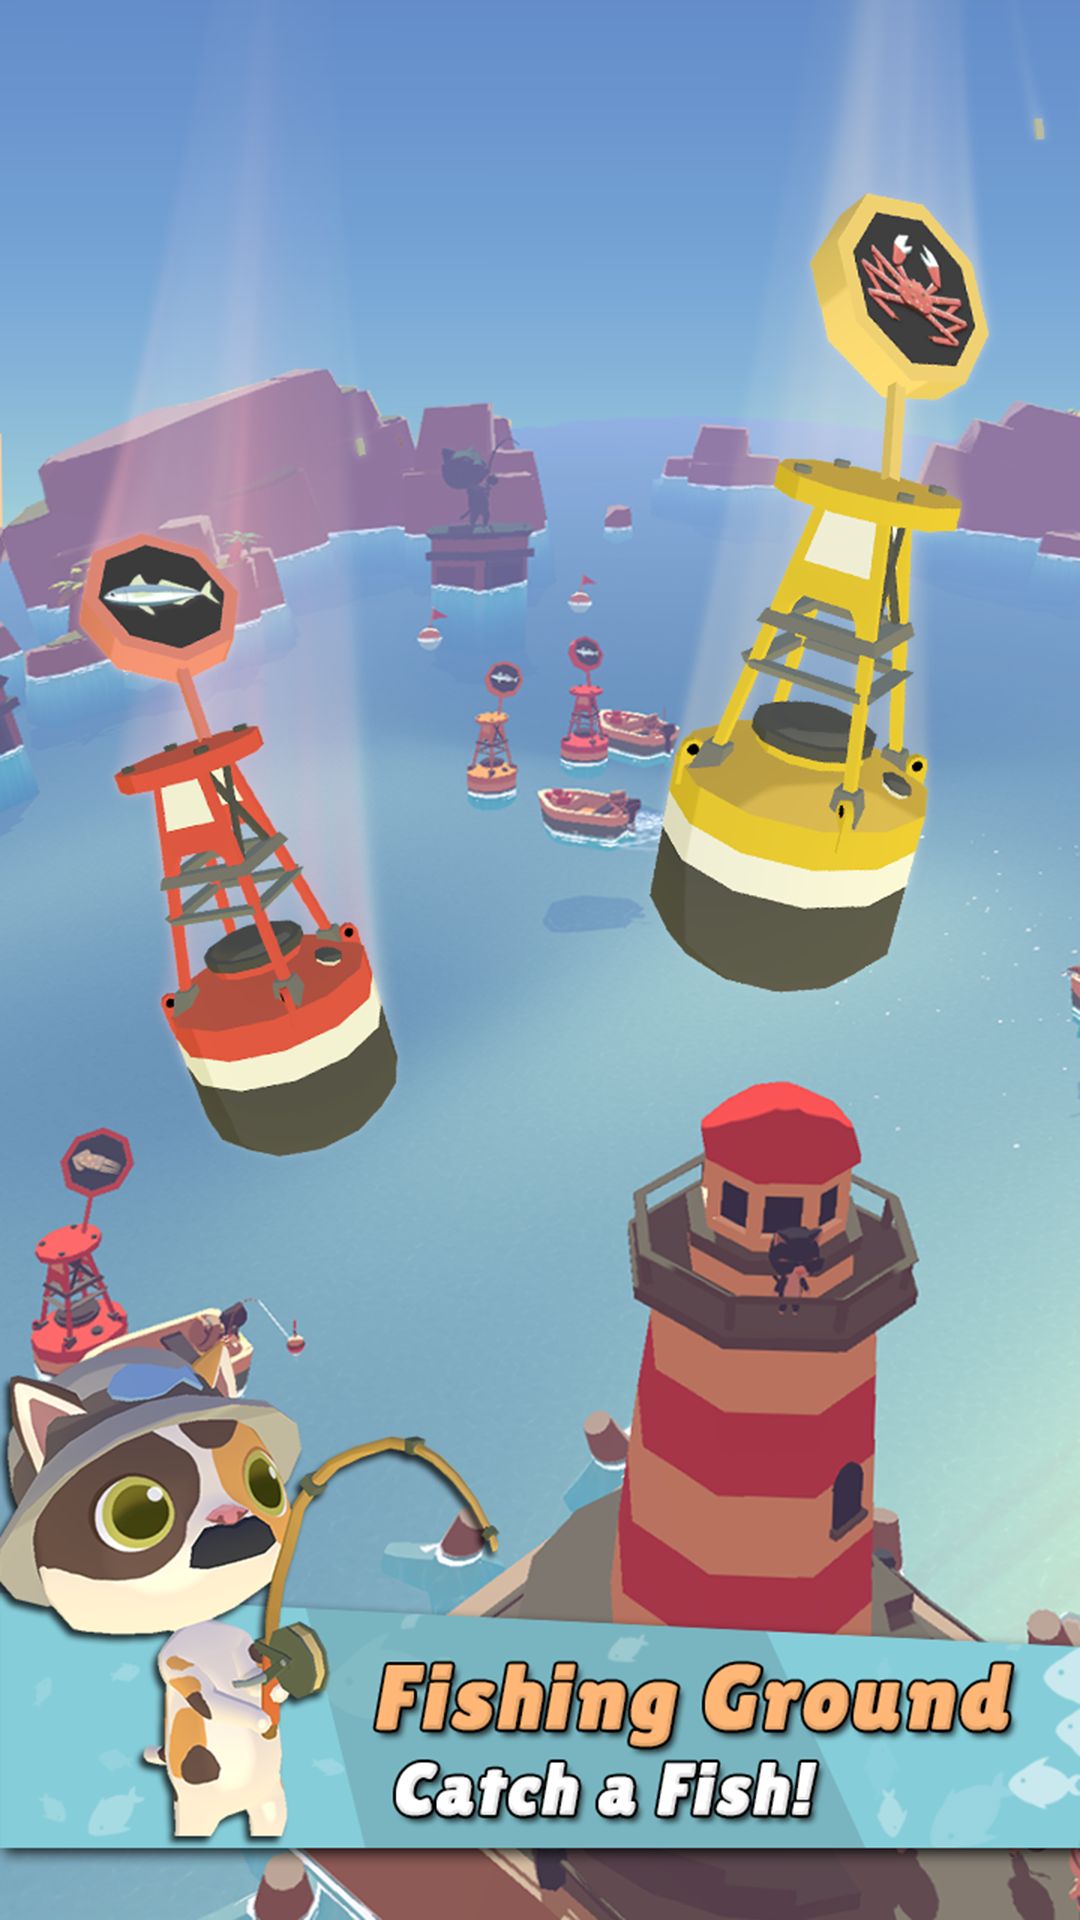 The Cat Fishing Village - Android game screenshots.